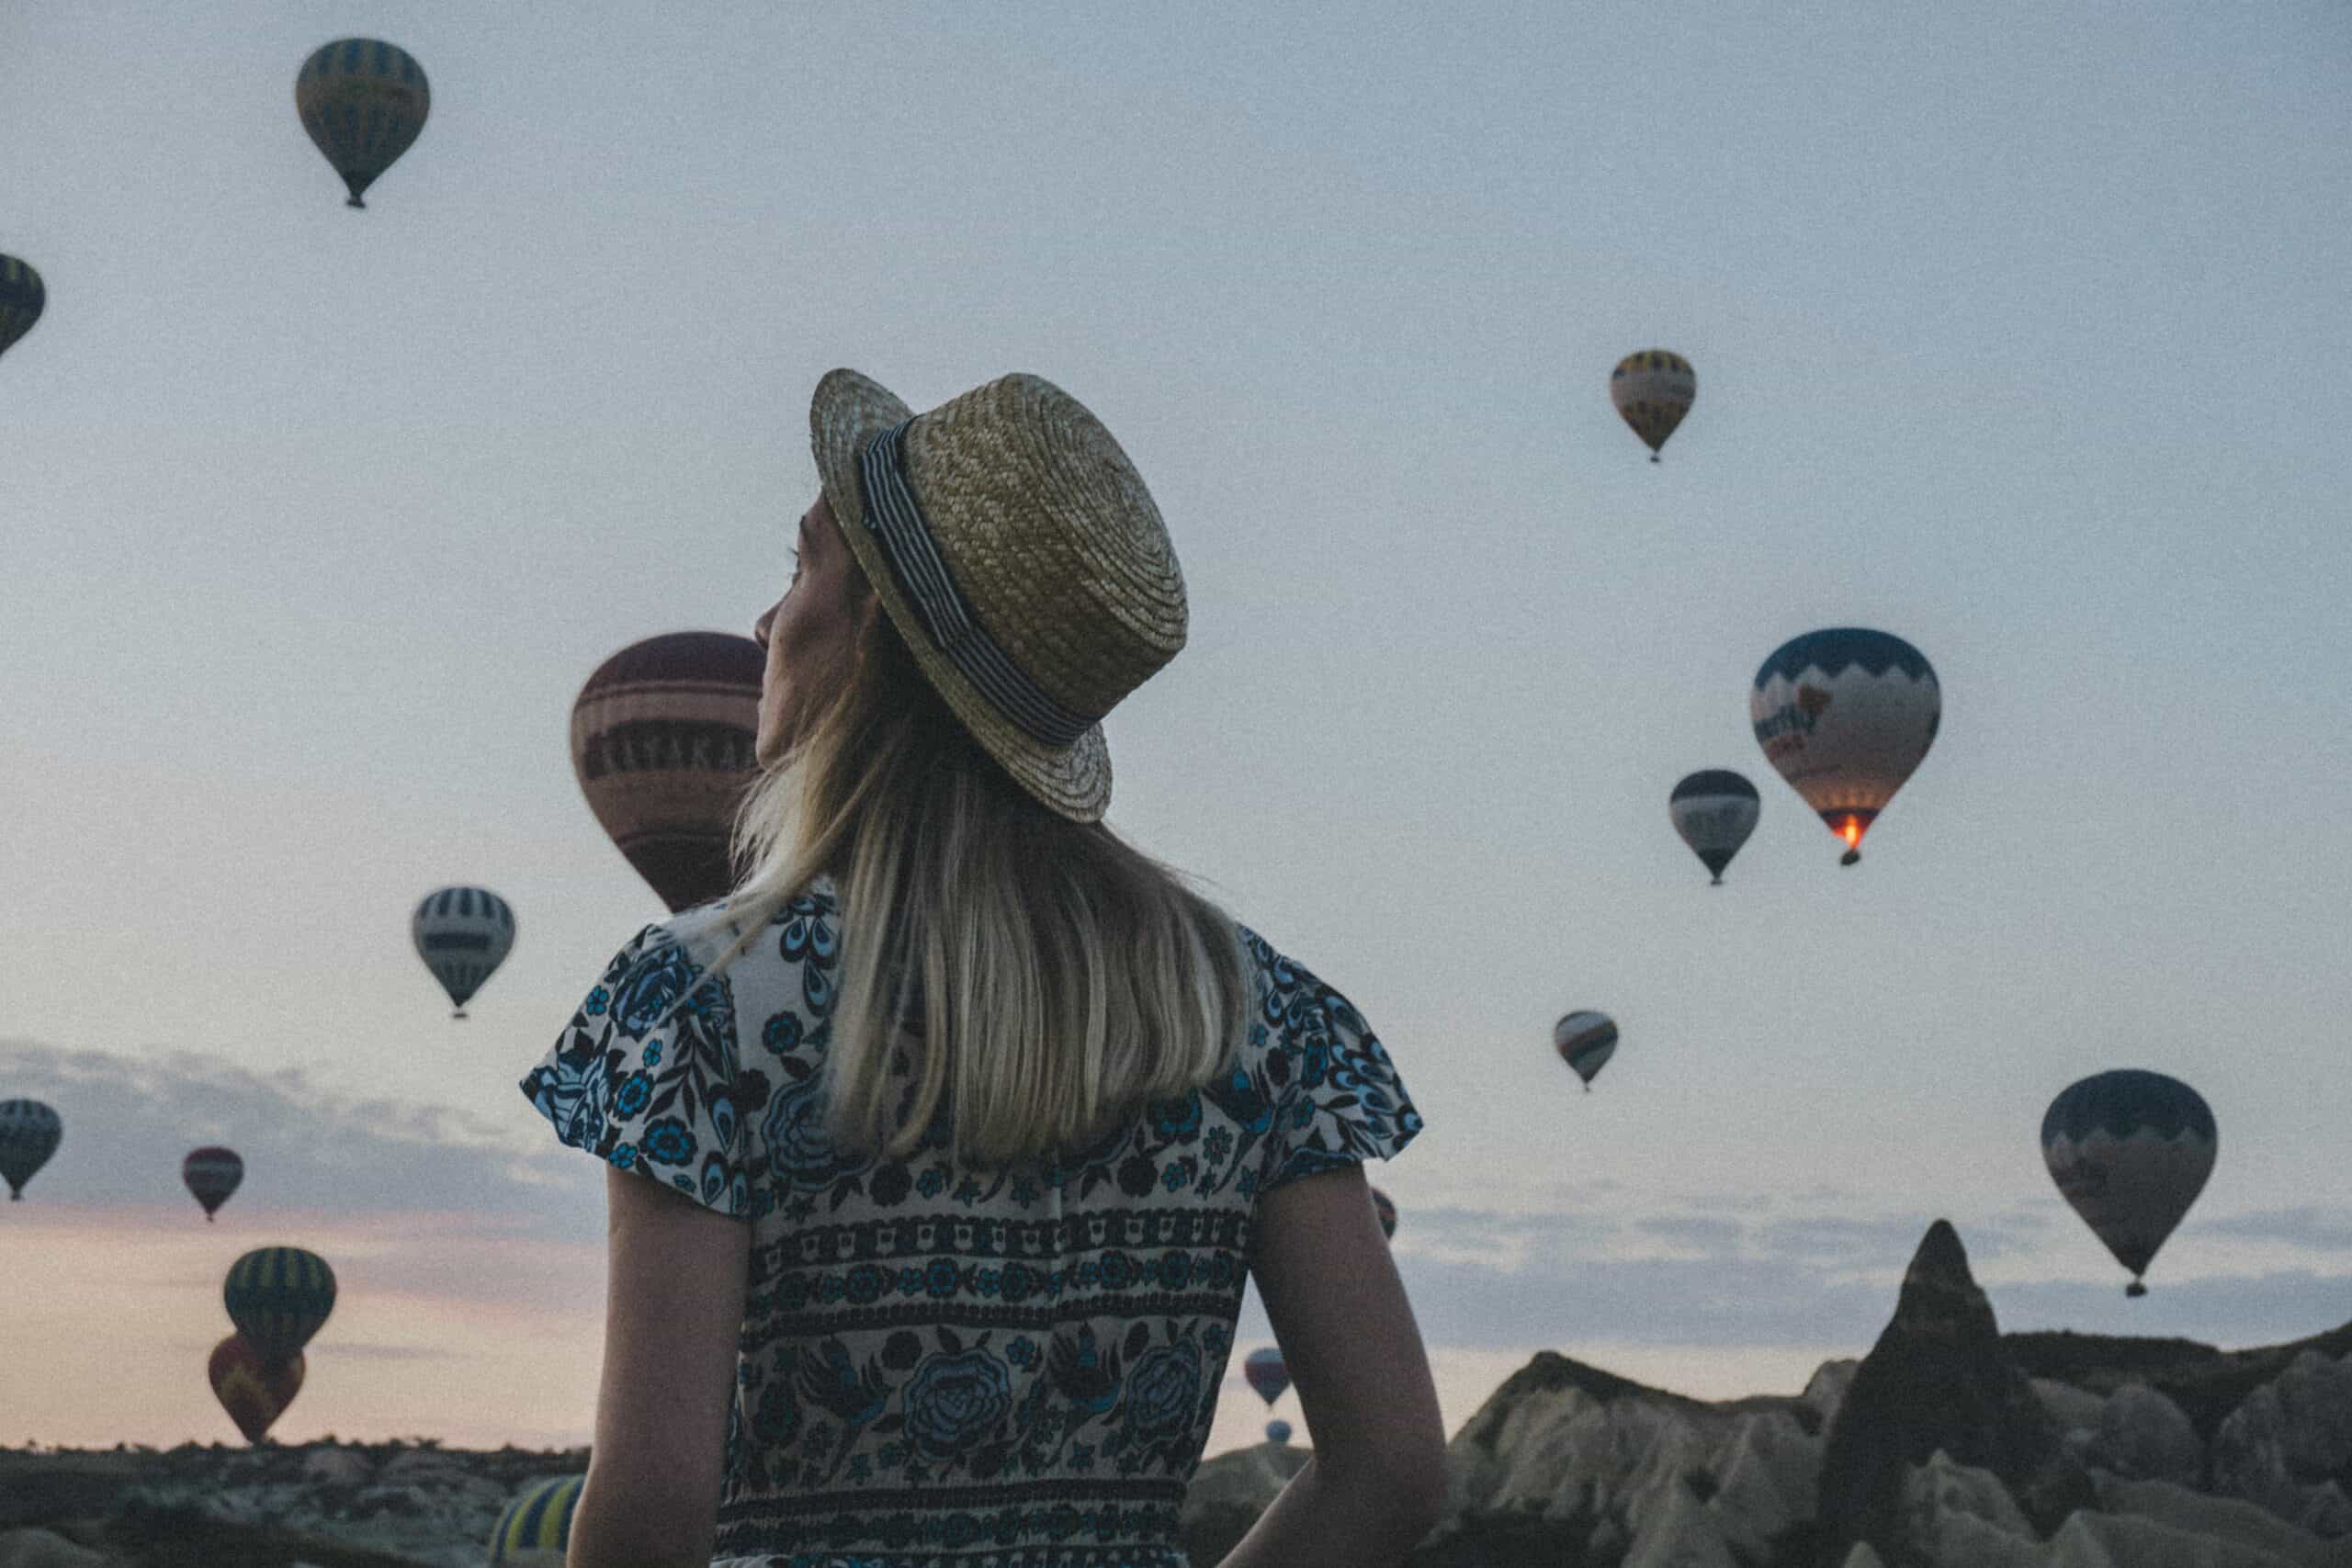 Woman wearing hat looking at hot air balloons taking off